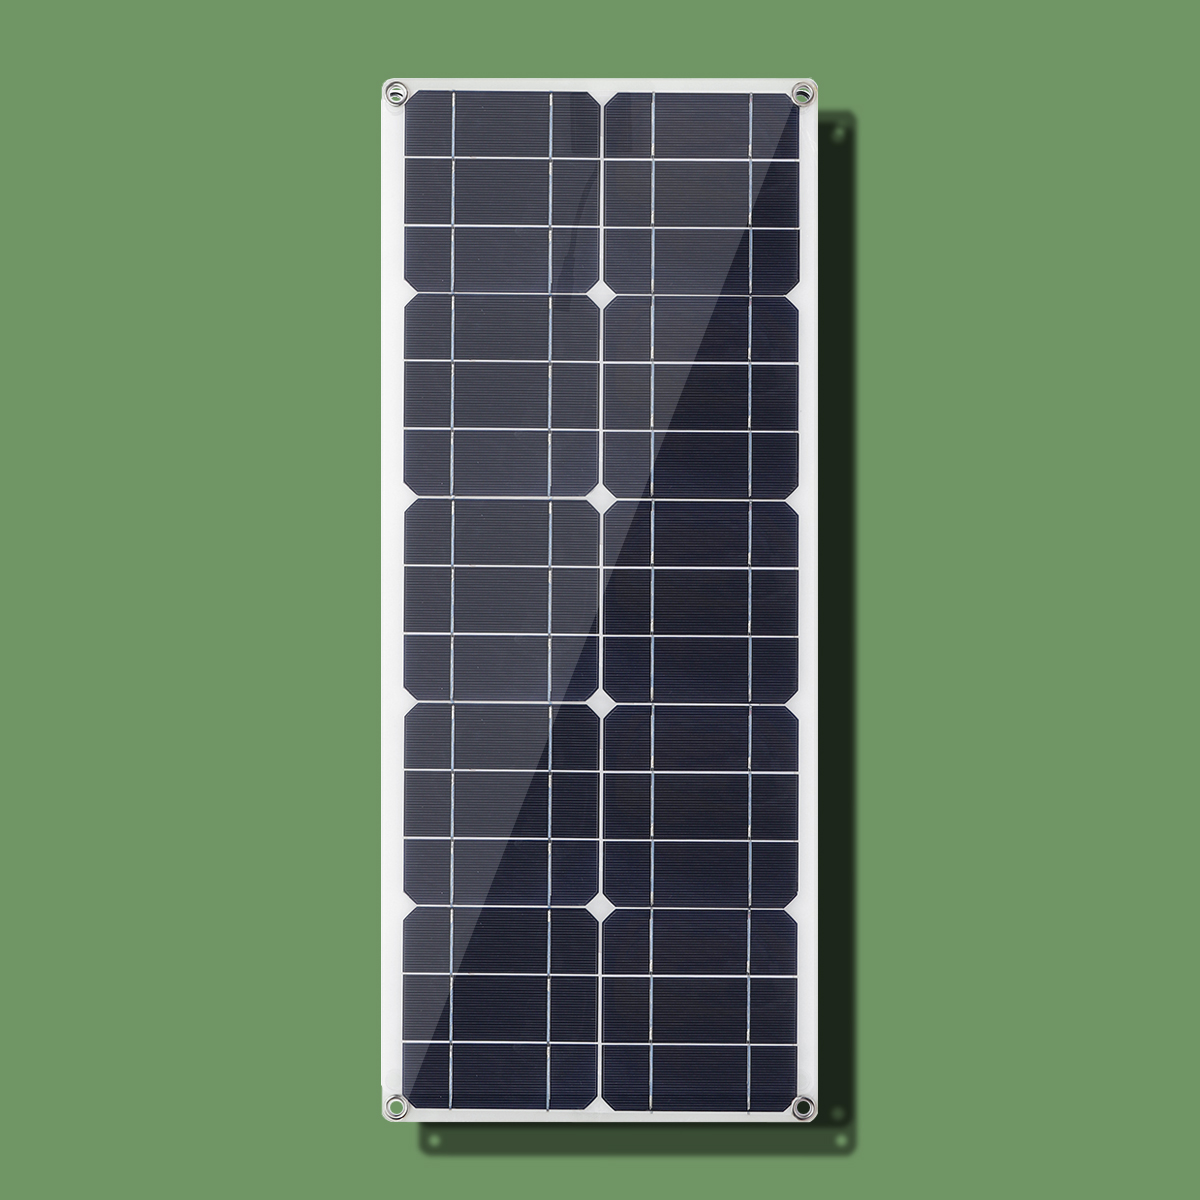 30W-18V-MonocrystalineSolar-Panel-Dual-12V5V-DC-USB-Charger-Kit-with-10A-Solar-Controller--Cables-1558949-6